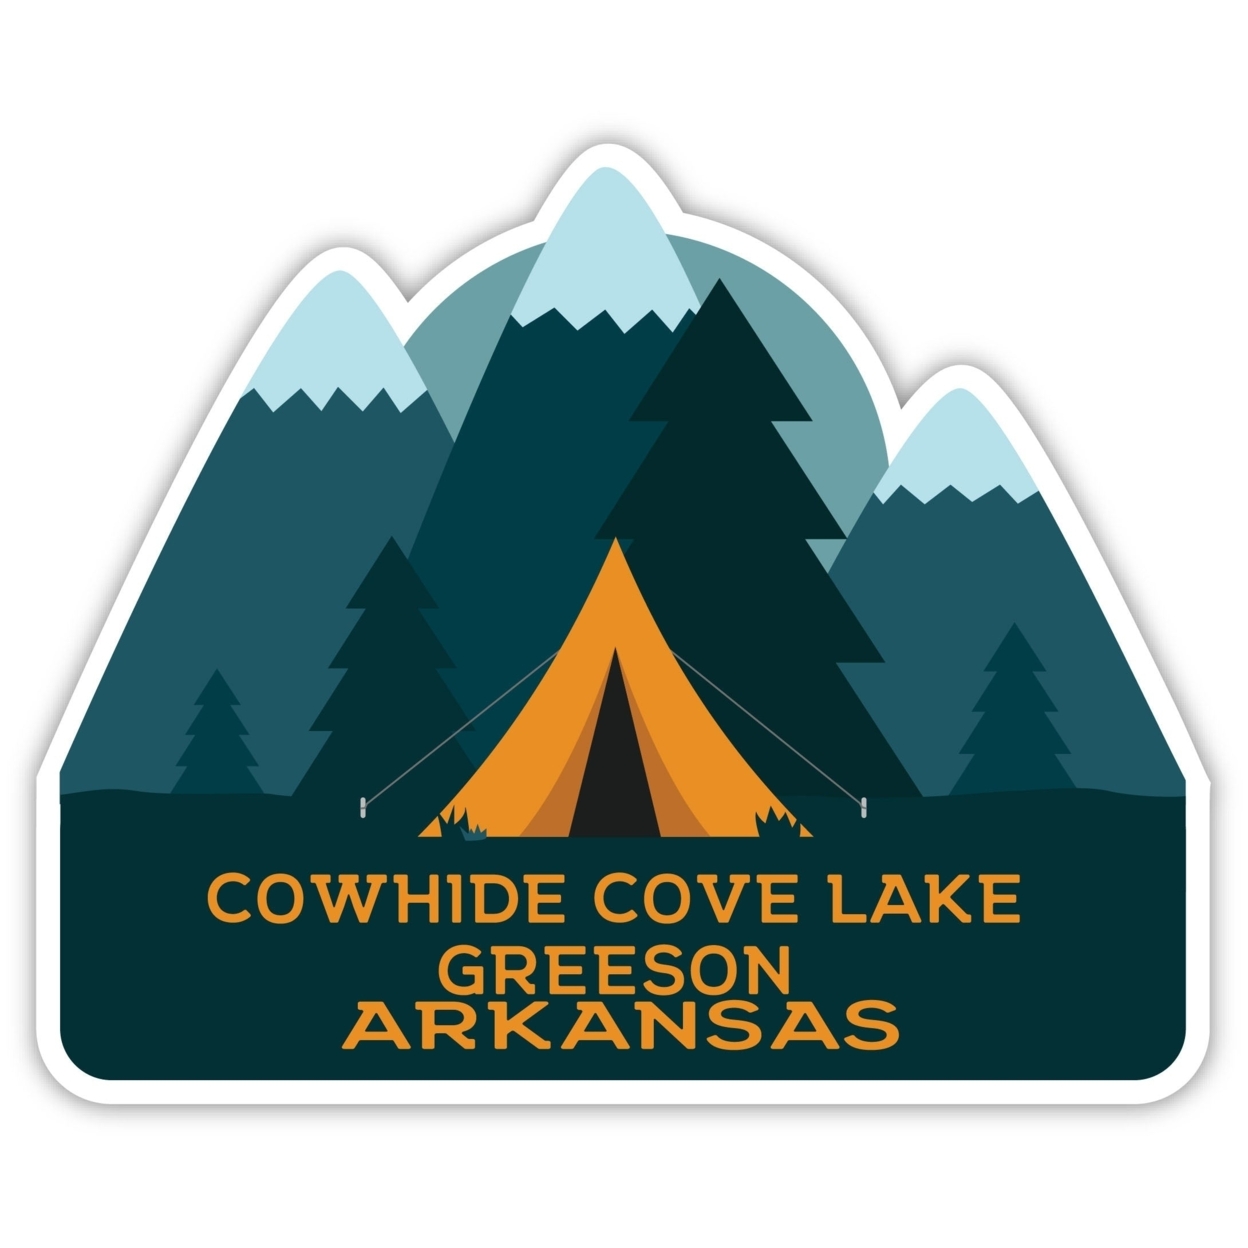 Cowhide Cove Lake Greeson Arkansas Souvenir Decorative Stickers (Choose Theme And Size) - 4-Pack, 8-Inch, Tent